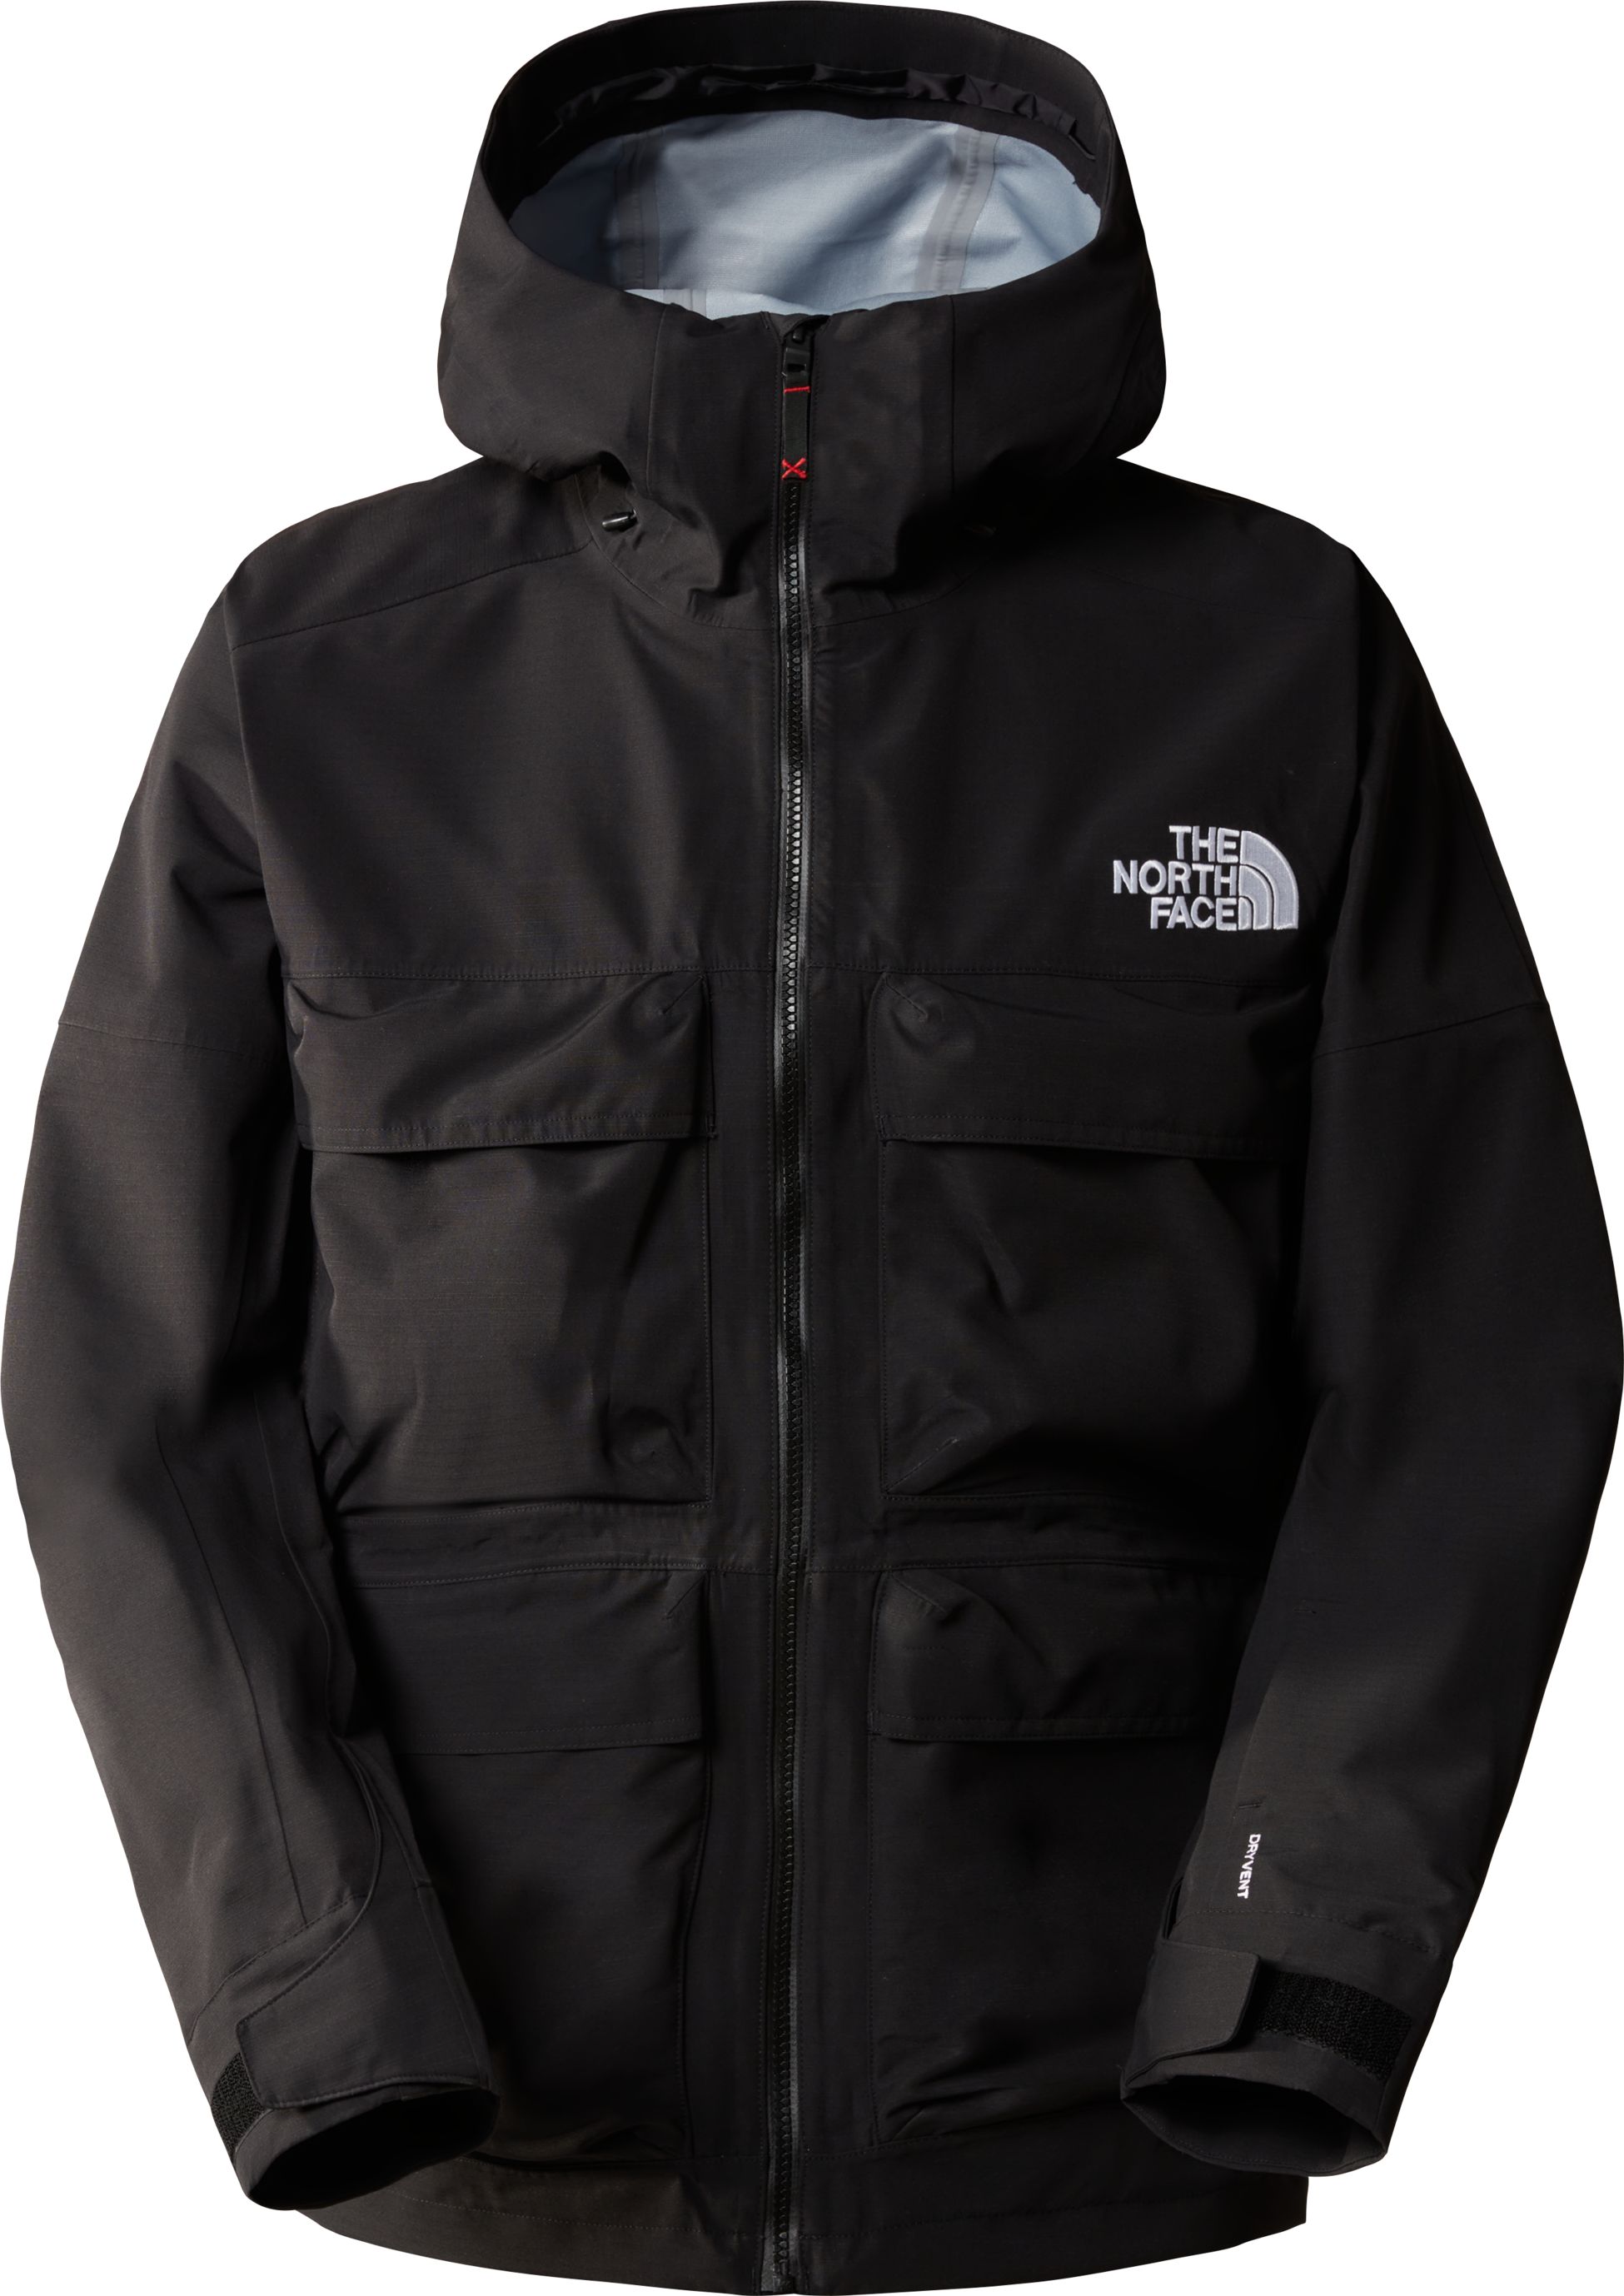 THE NORTH FACE, M DRAGLINE JACKET